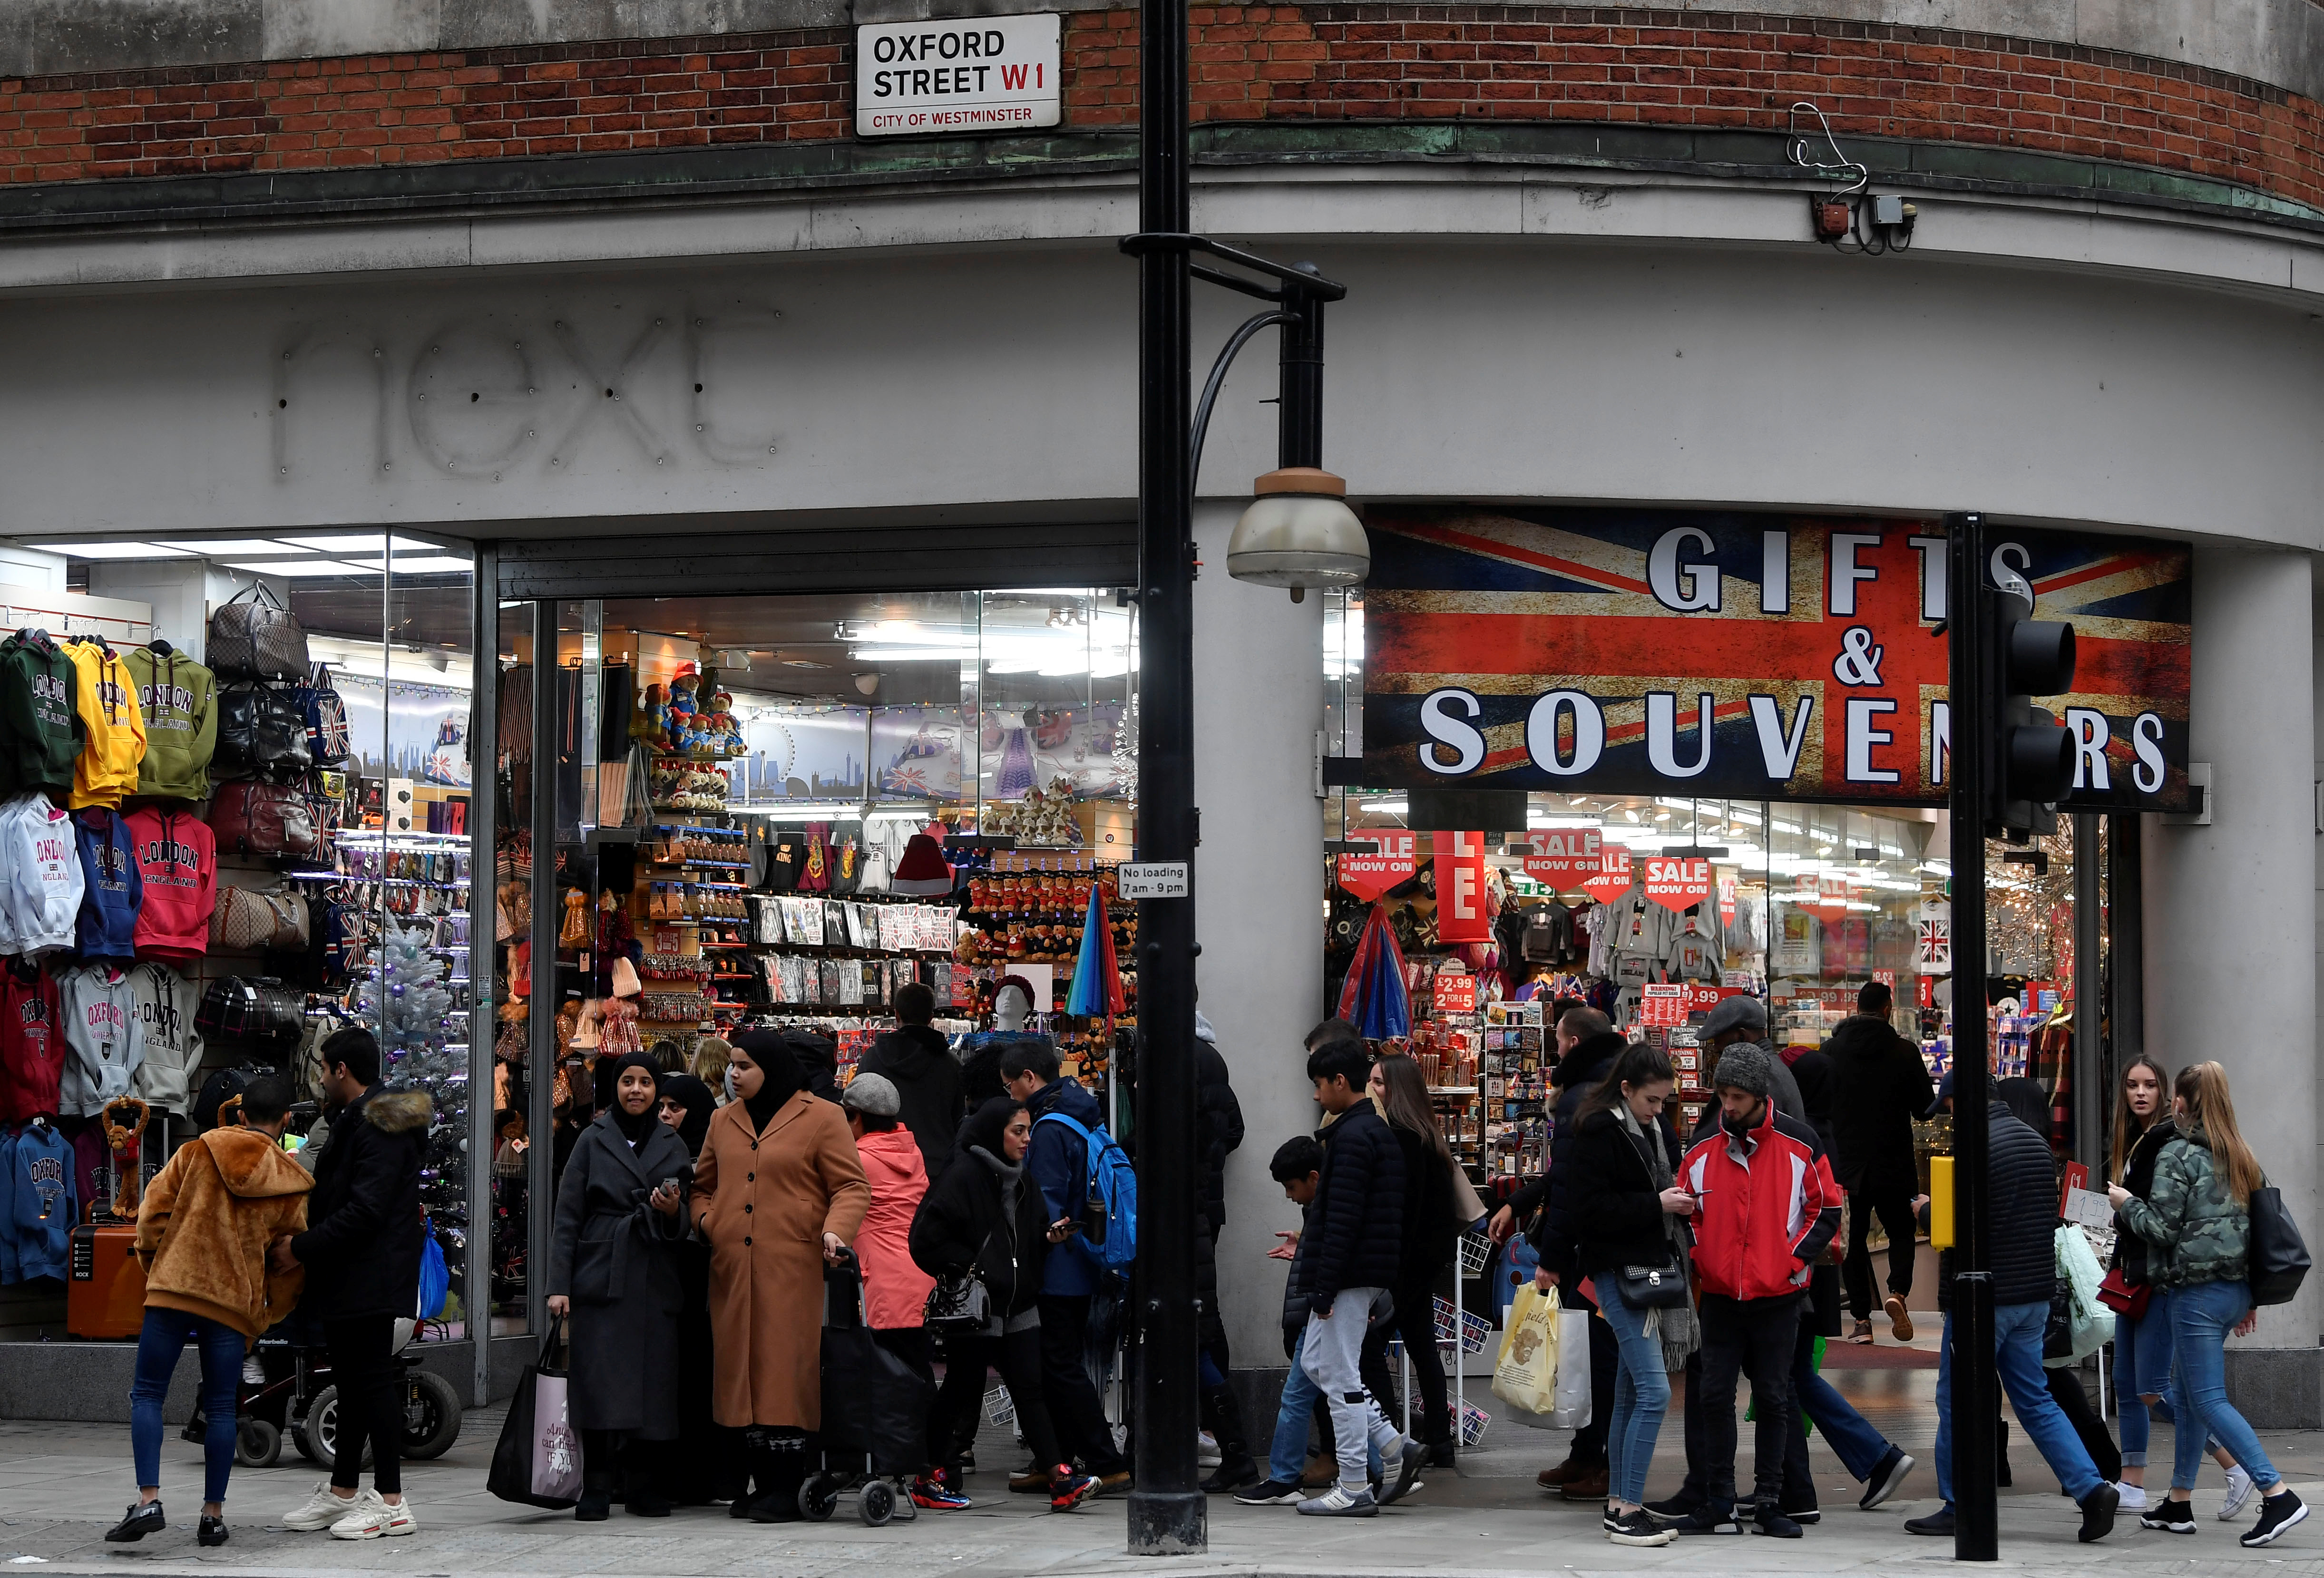 Shoppers walk past a former branch of the British clothing retailer Next, now converted into an independent gift shop on Oxford Street in London, Britain, January 3, 2019. REUTERS/Toby Melville